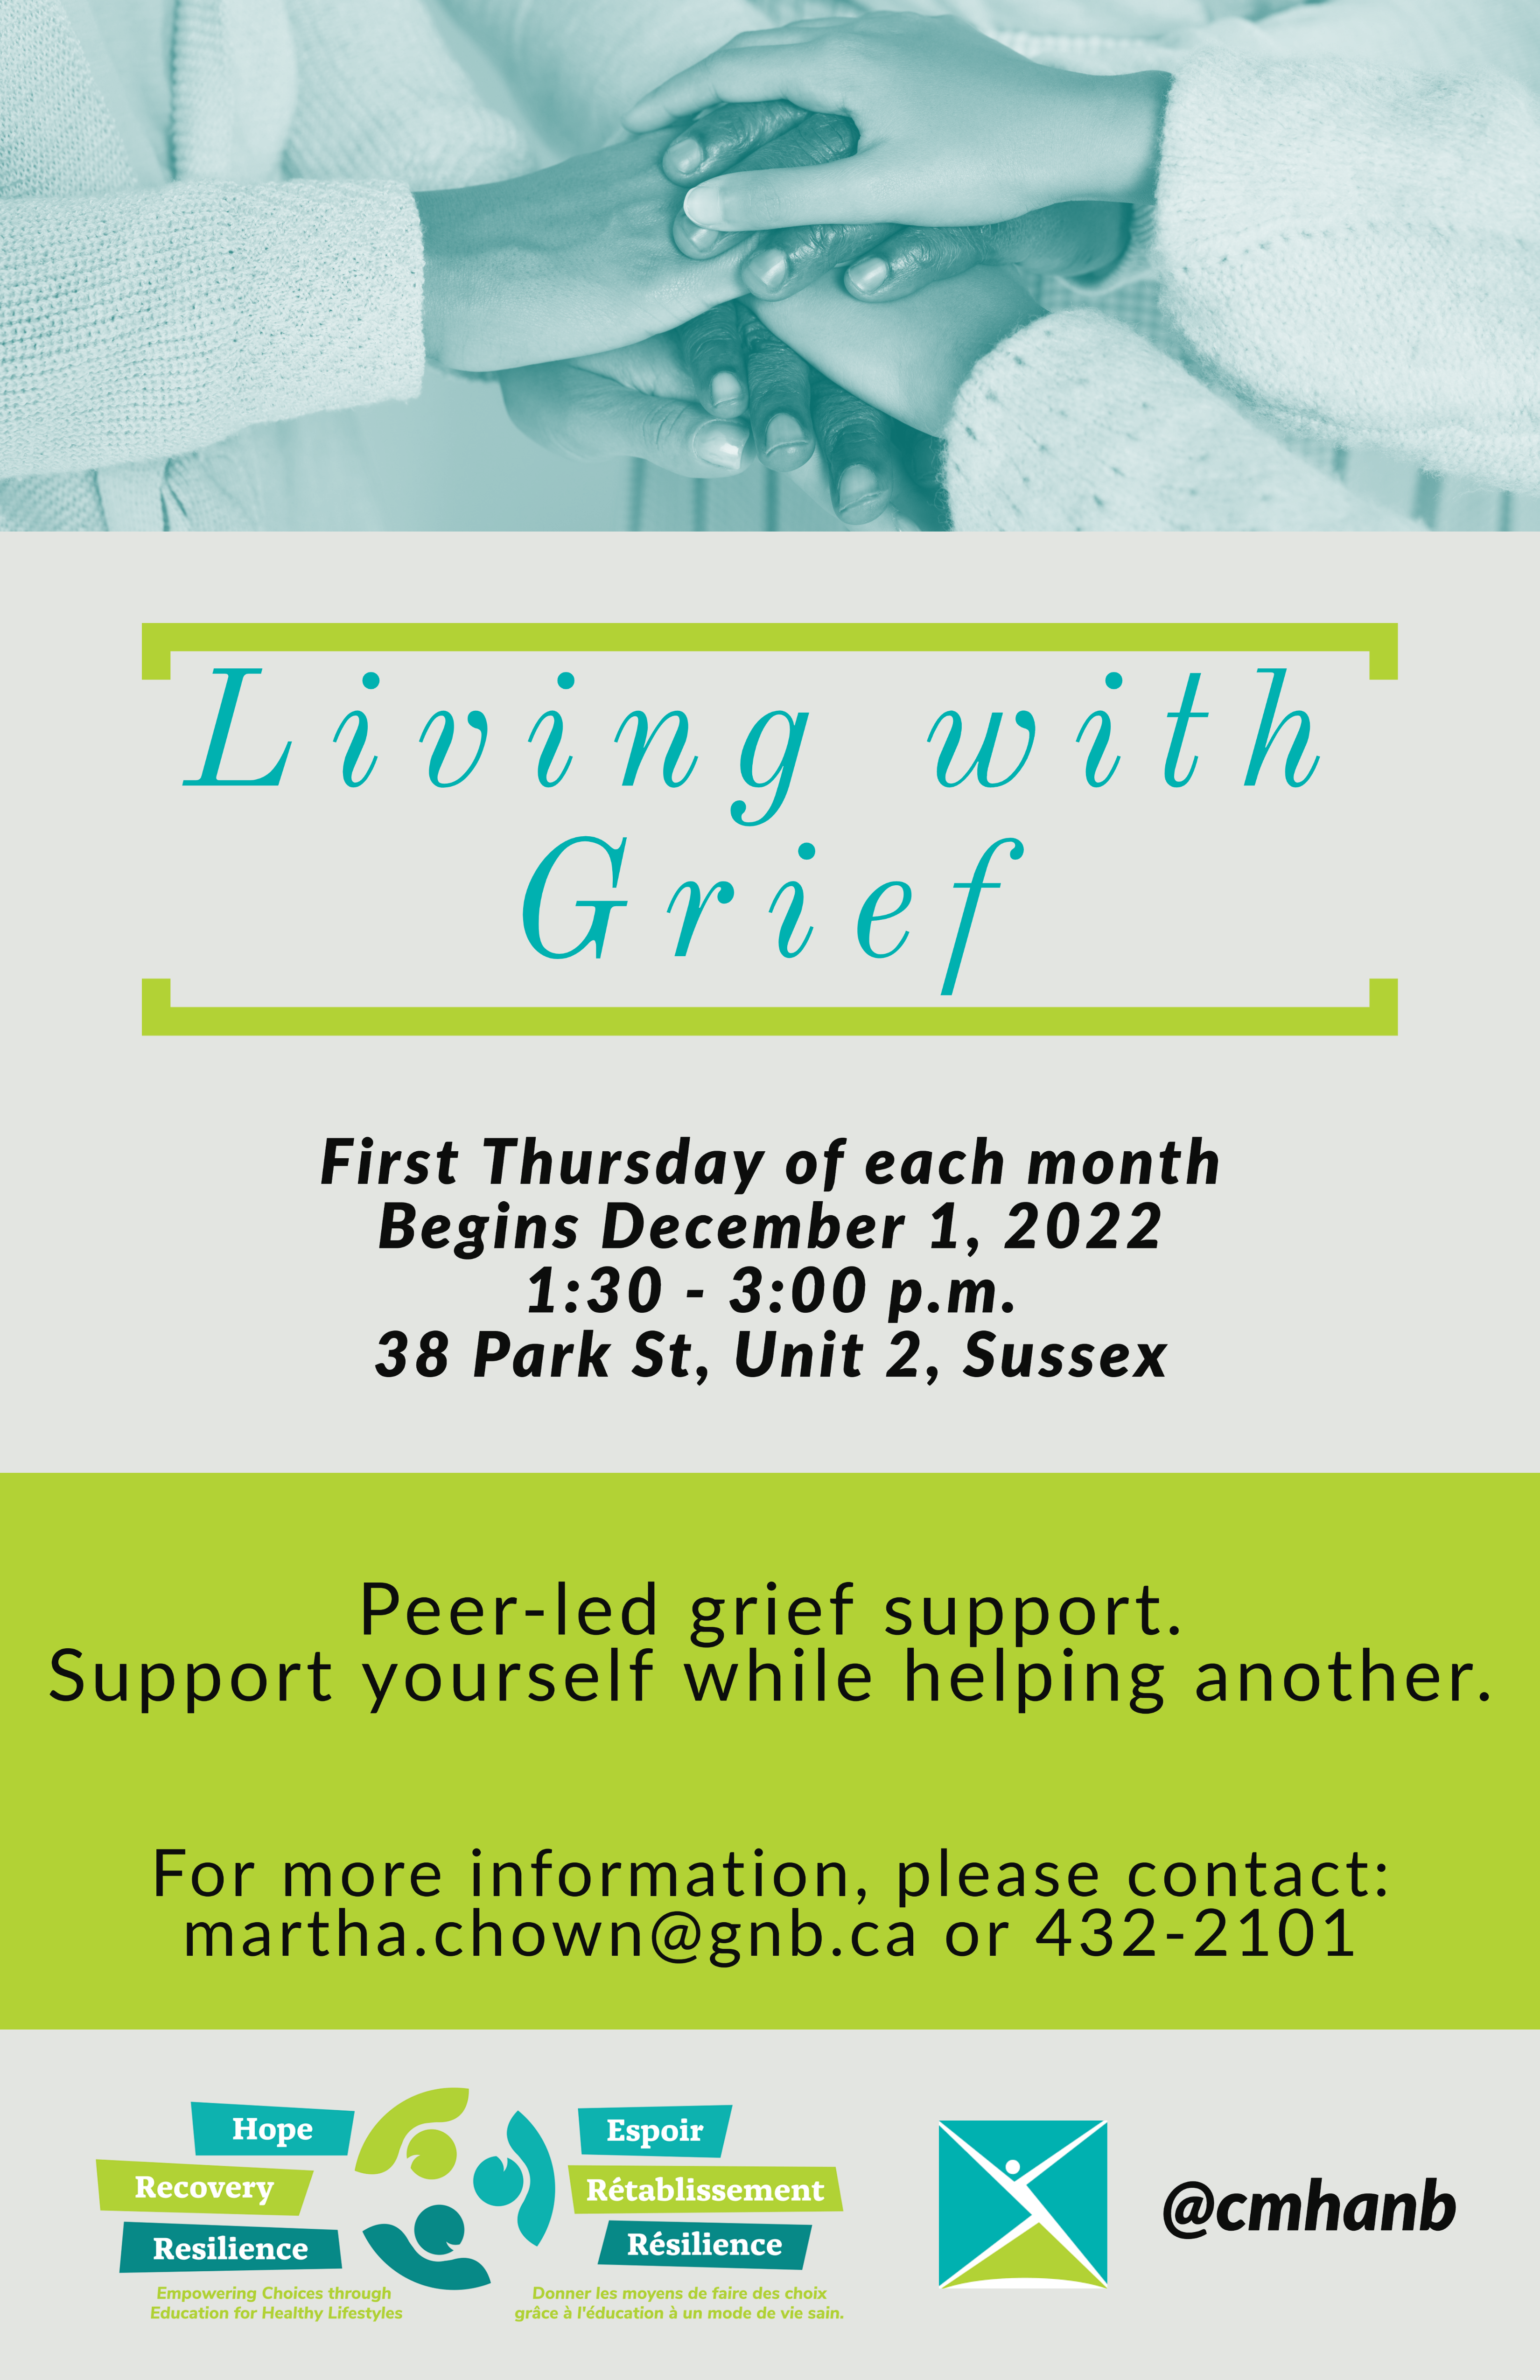 Living with Grief